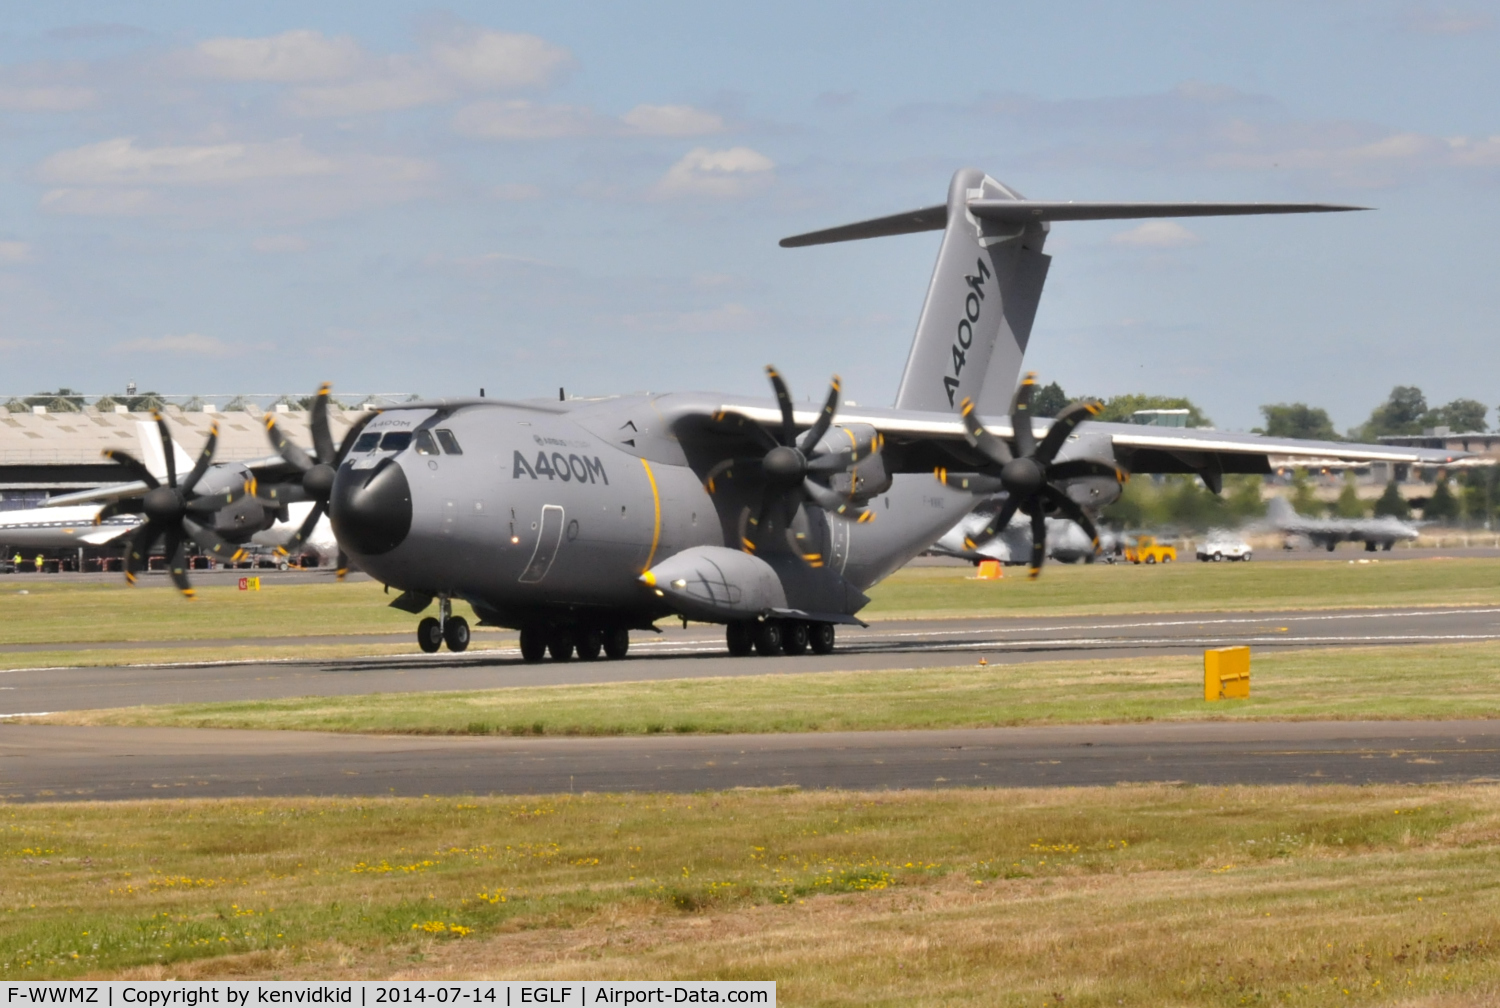 F-WWMZ, 2011 Airbus A400M-180 Atlas C/N 006, Landing after it's display.